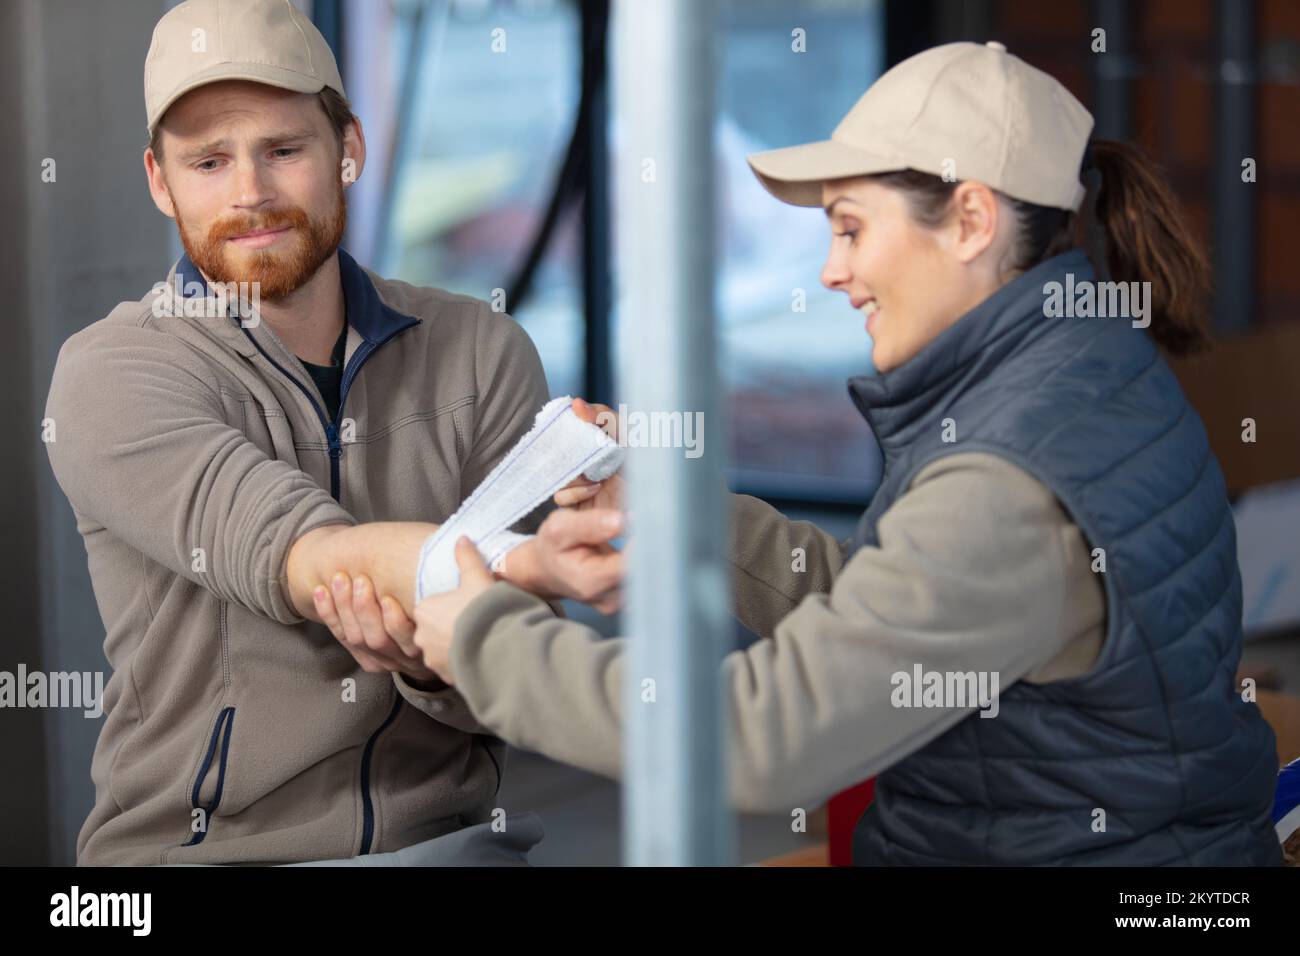 male and female construction workers Stock Photo